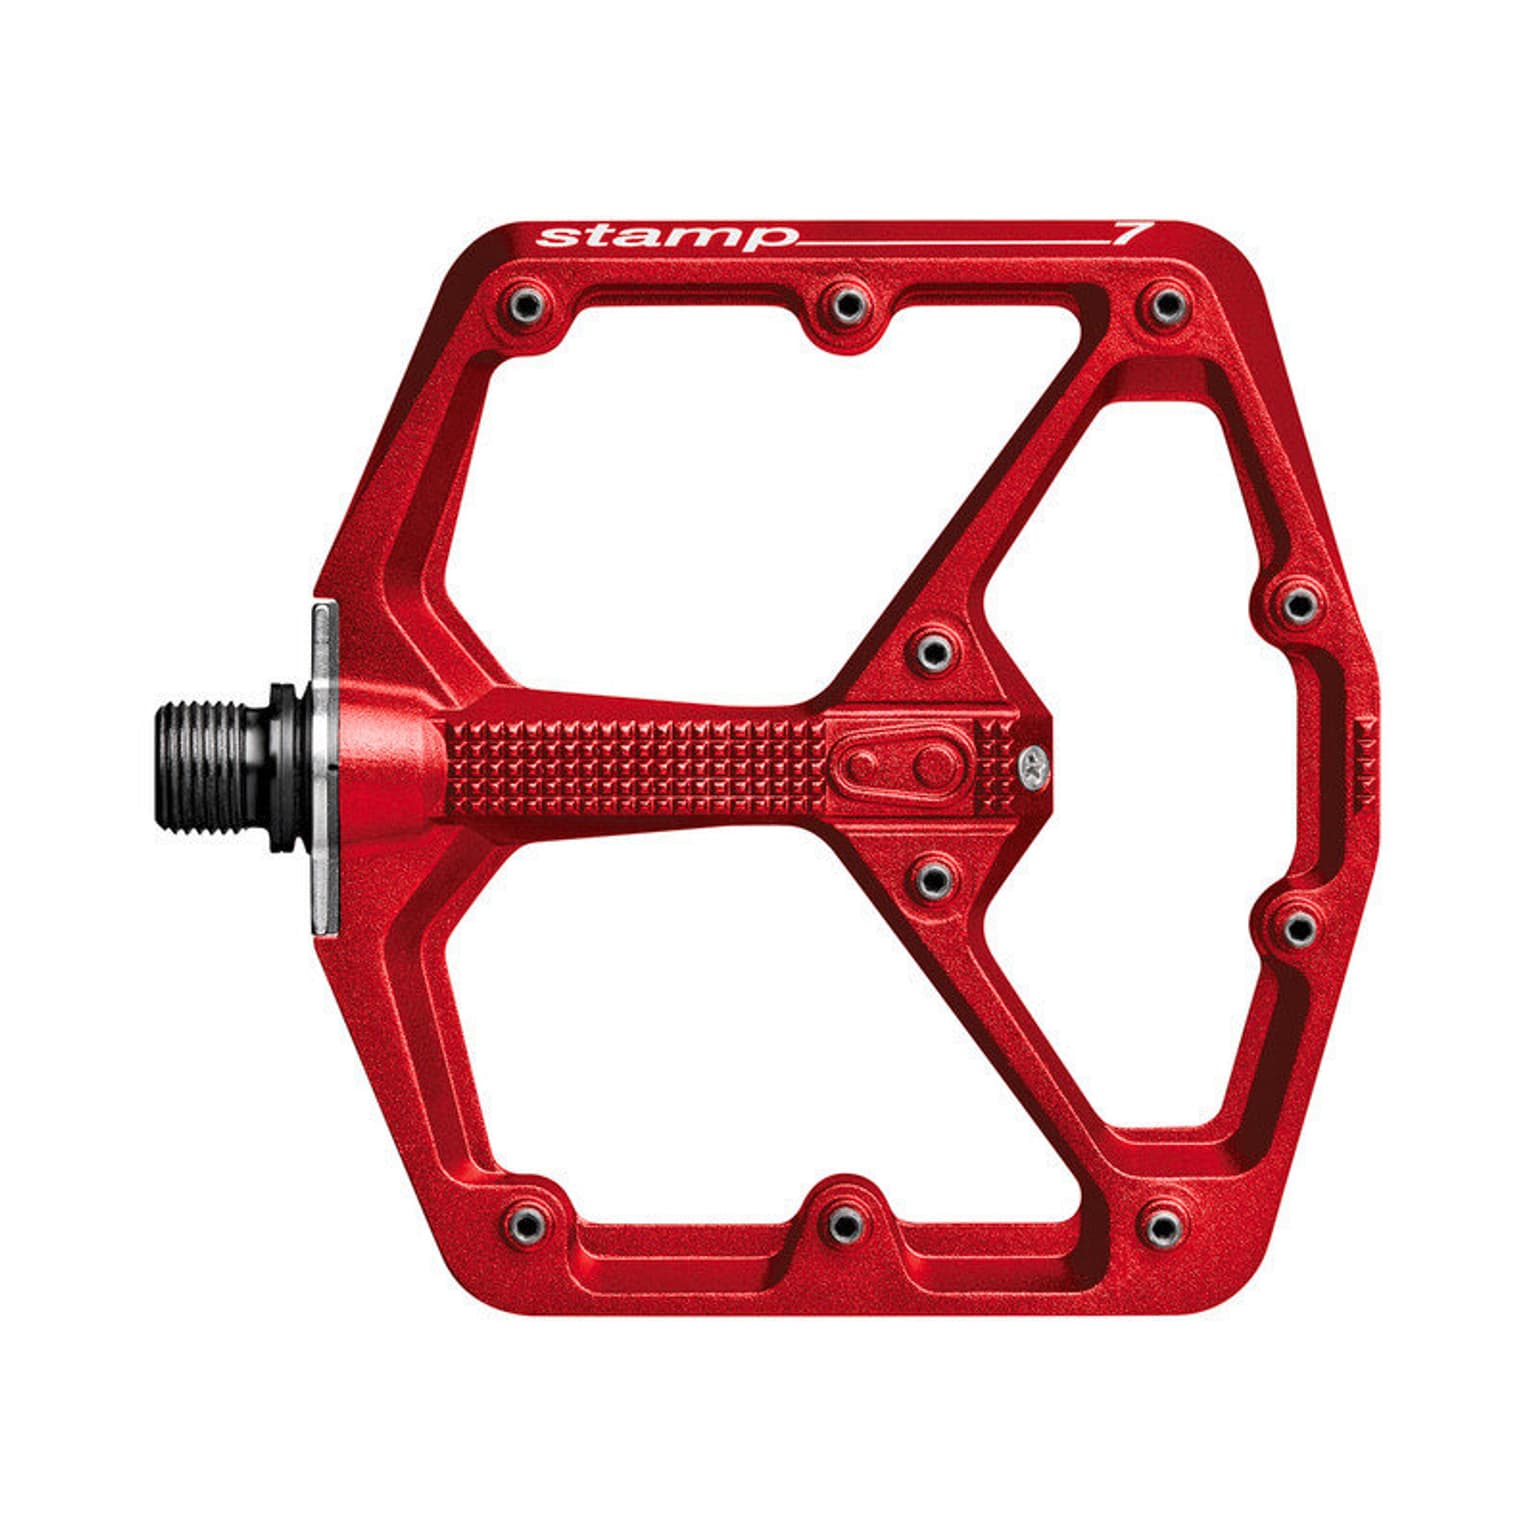 crankbrothers crankbrothers Pedal Stamp 7 large Pedale 1